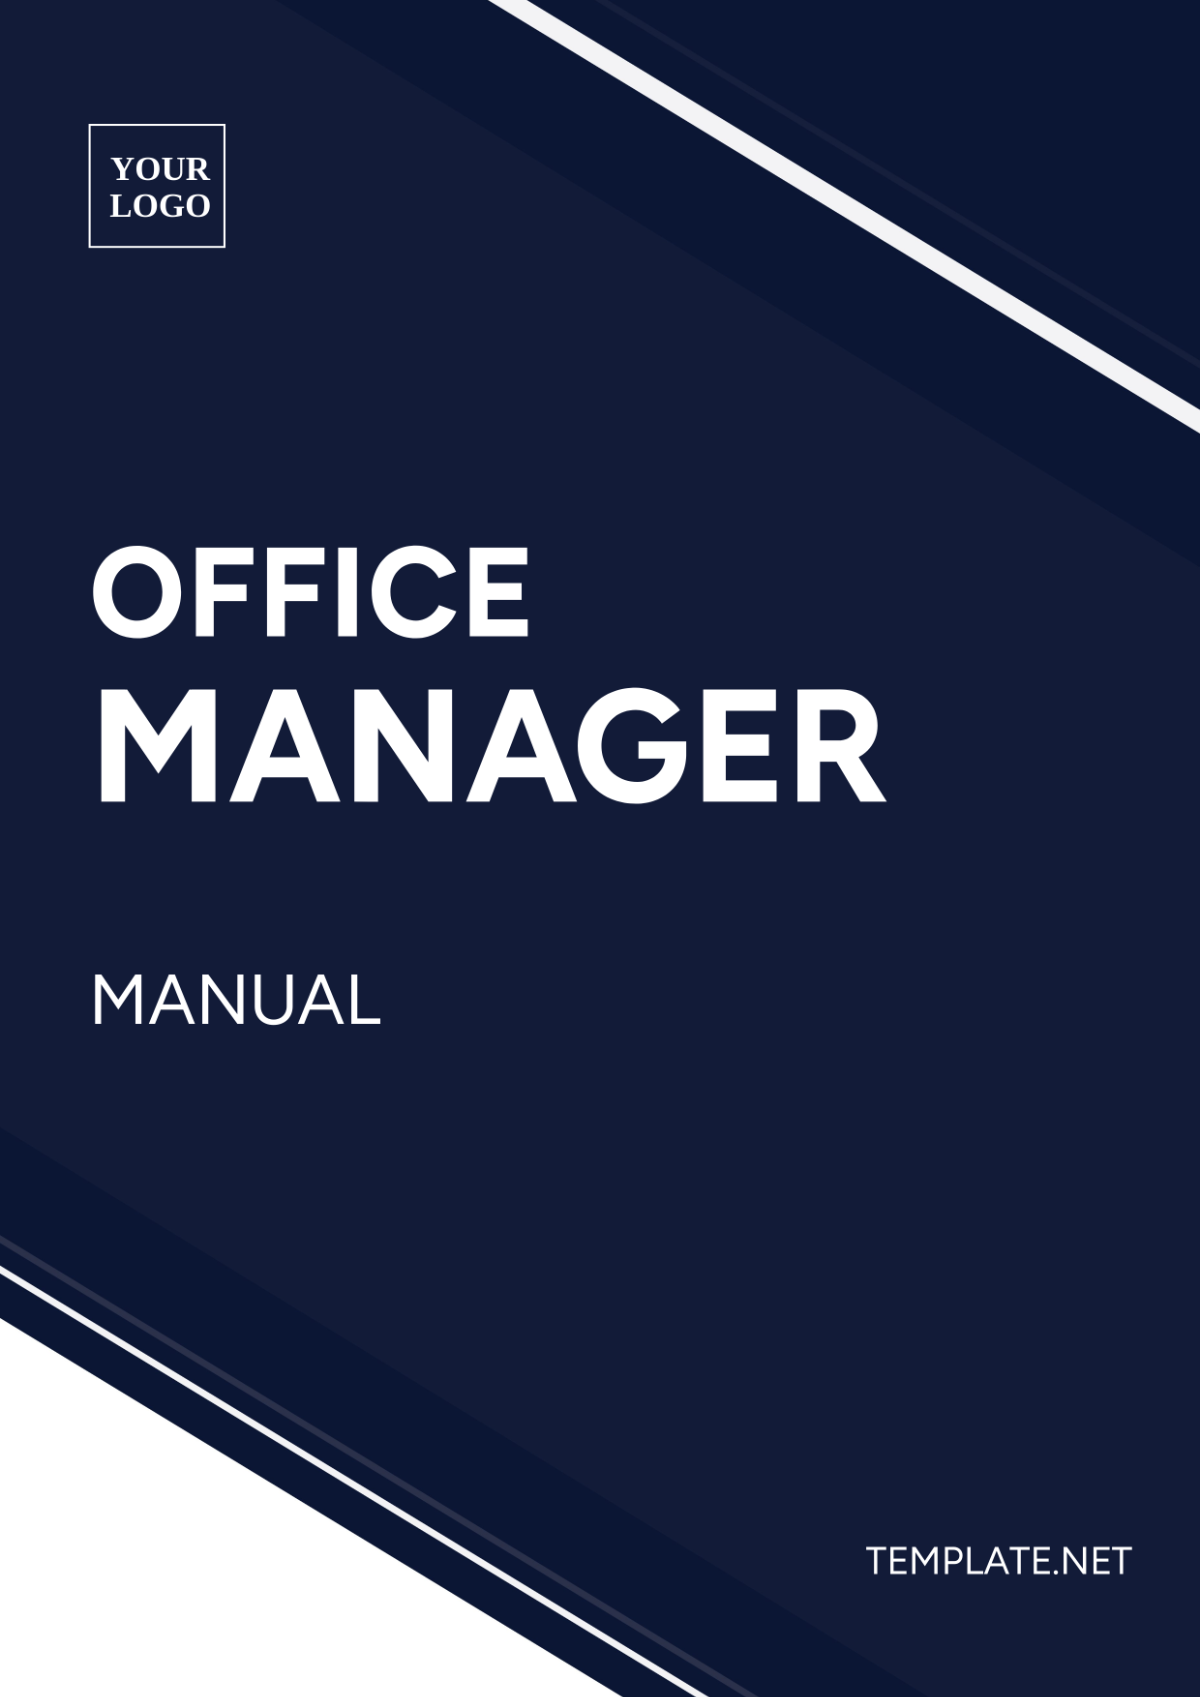 Office Manager Manual Template